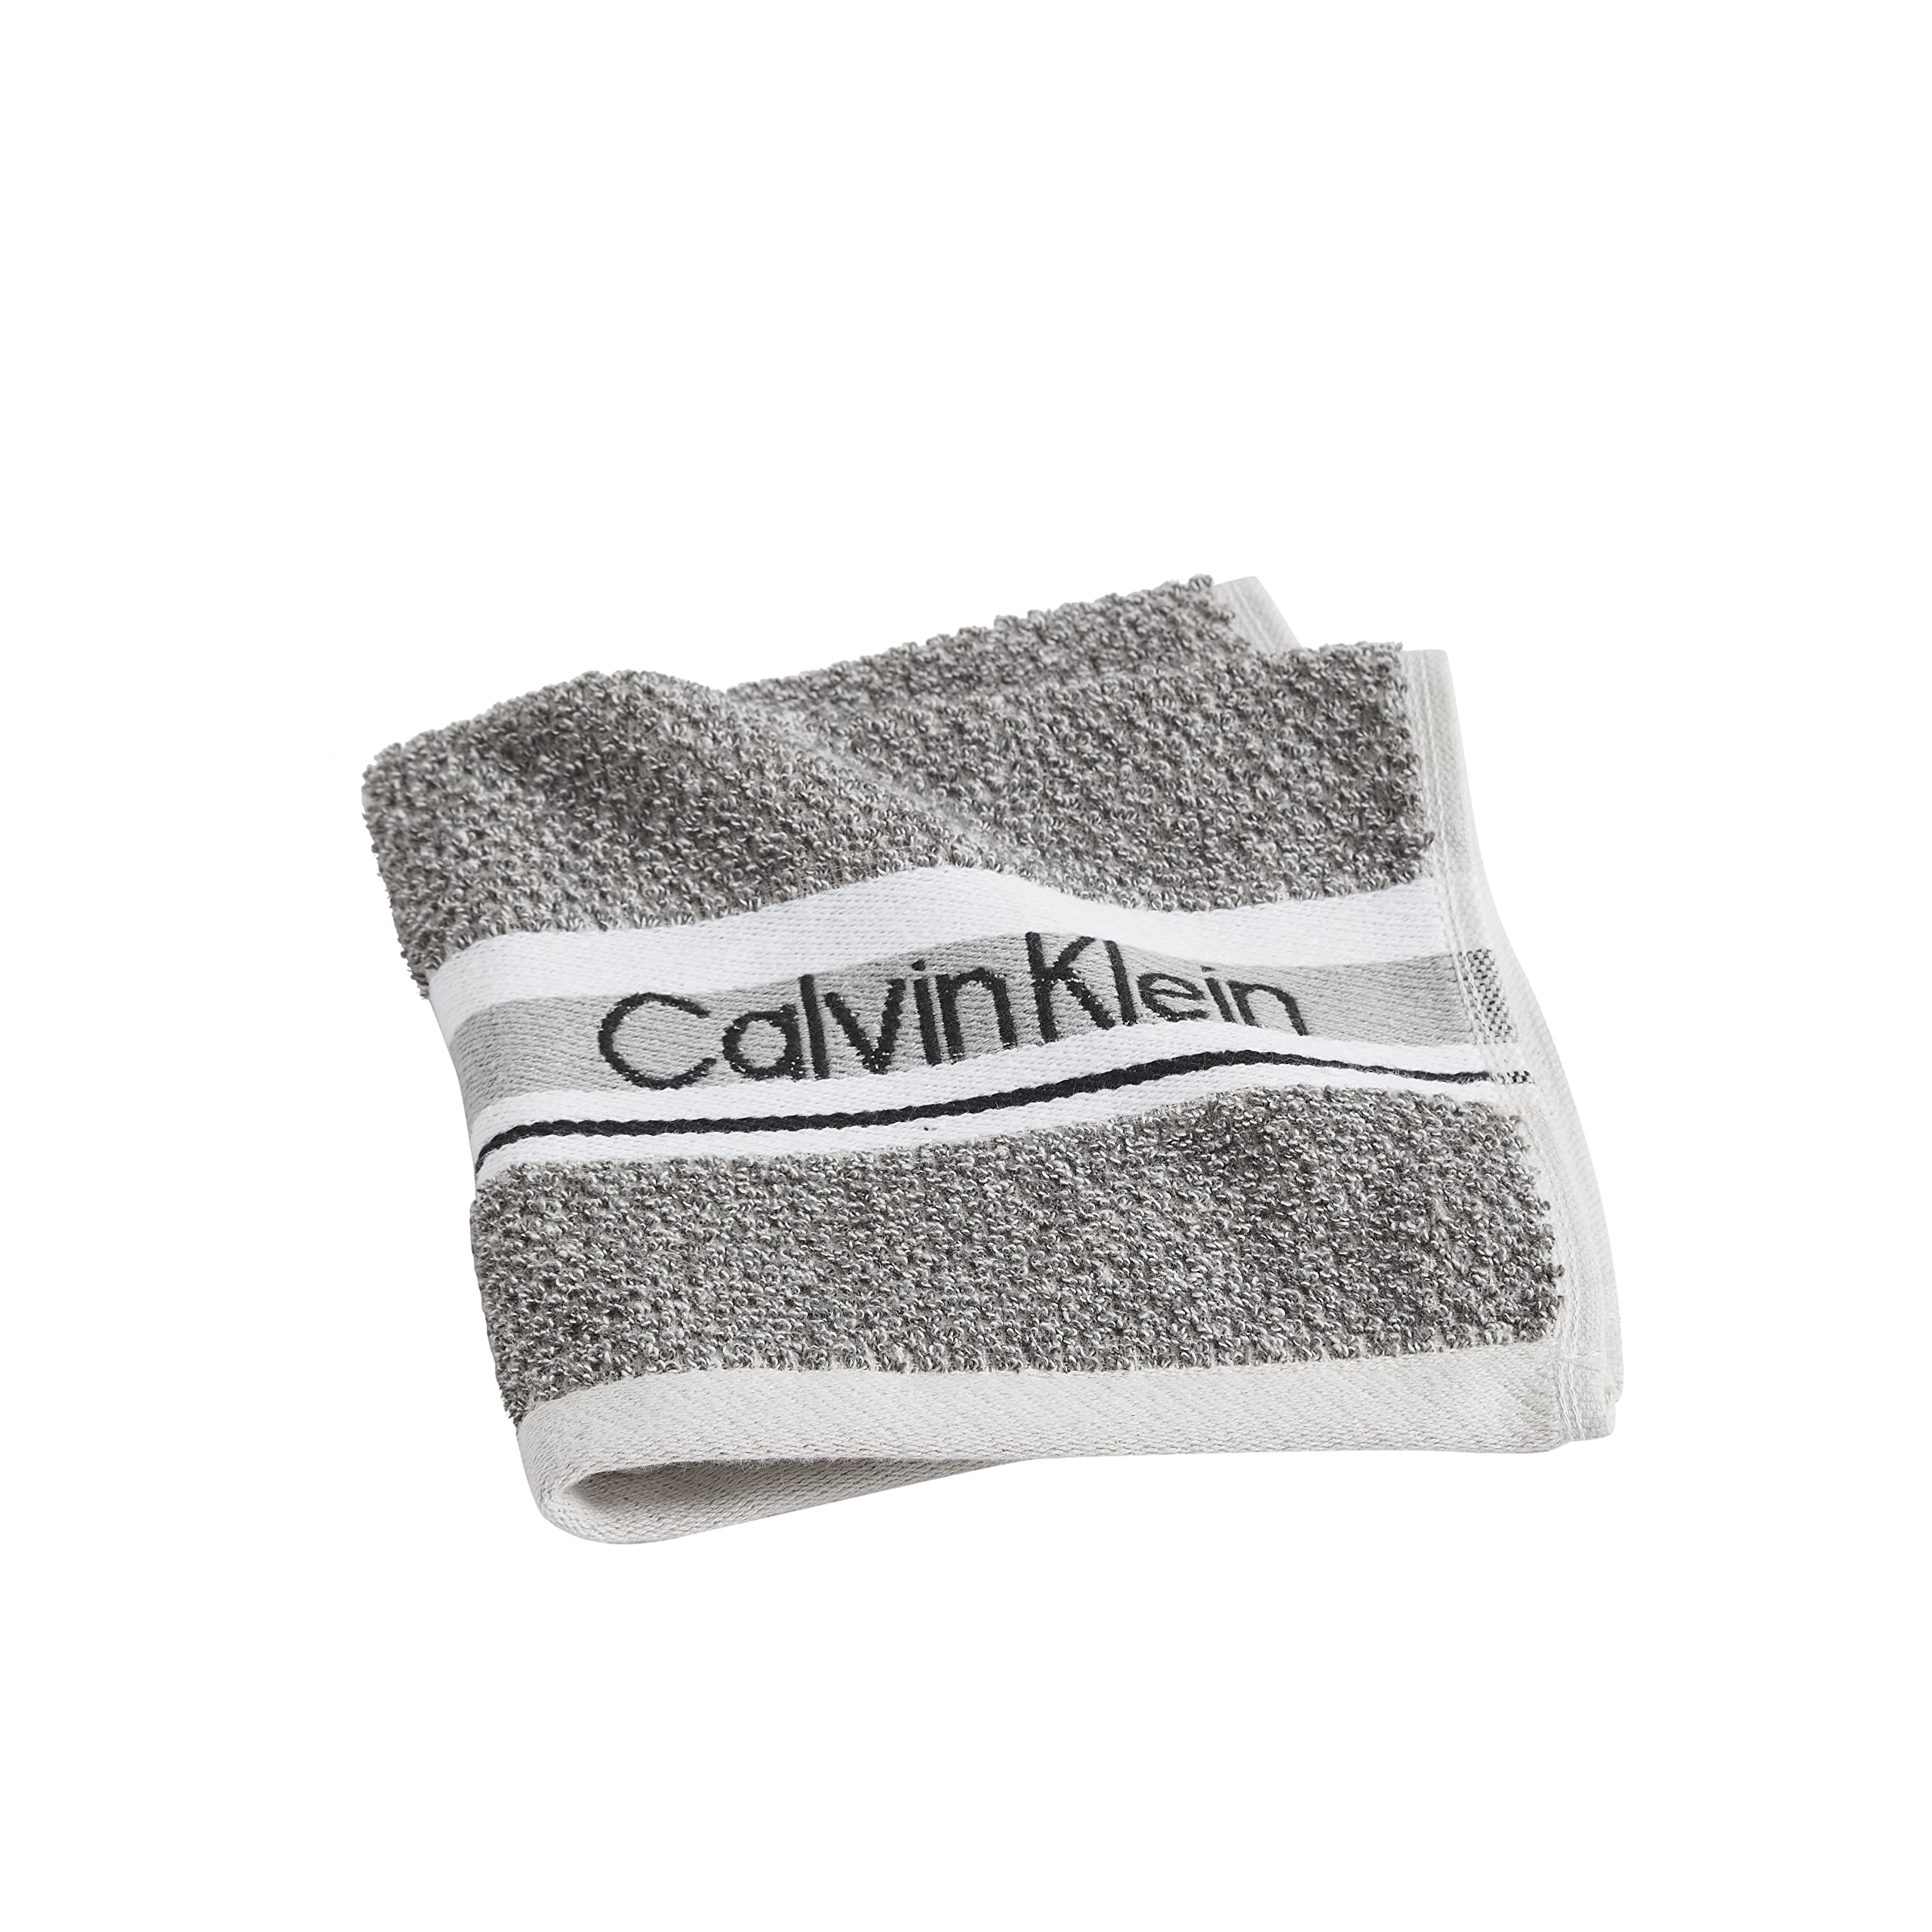 Calvin Klein Grindle Logo Band Printed 1 Piece Terry Washcloth - 13 x 13  Inches, 100% Cotton 500 GSM (Teal)